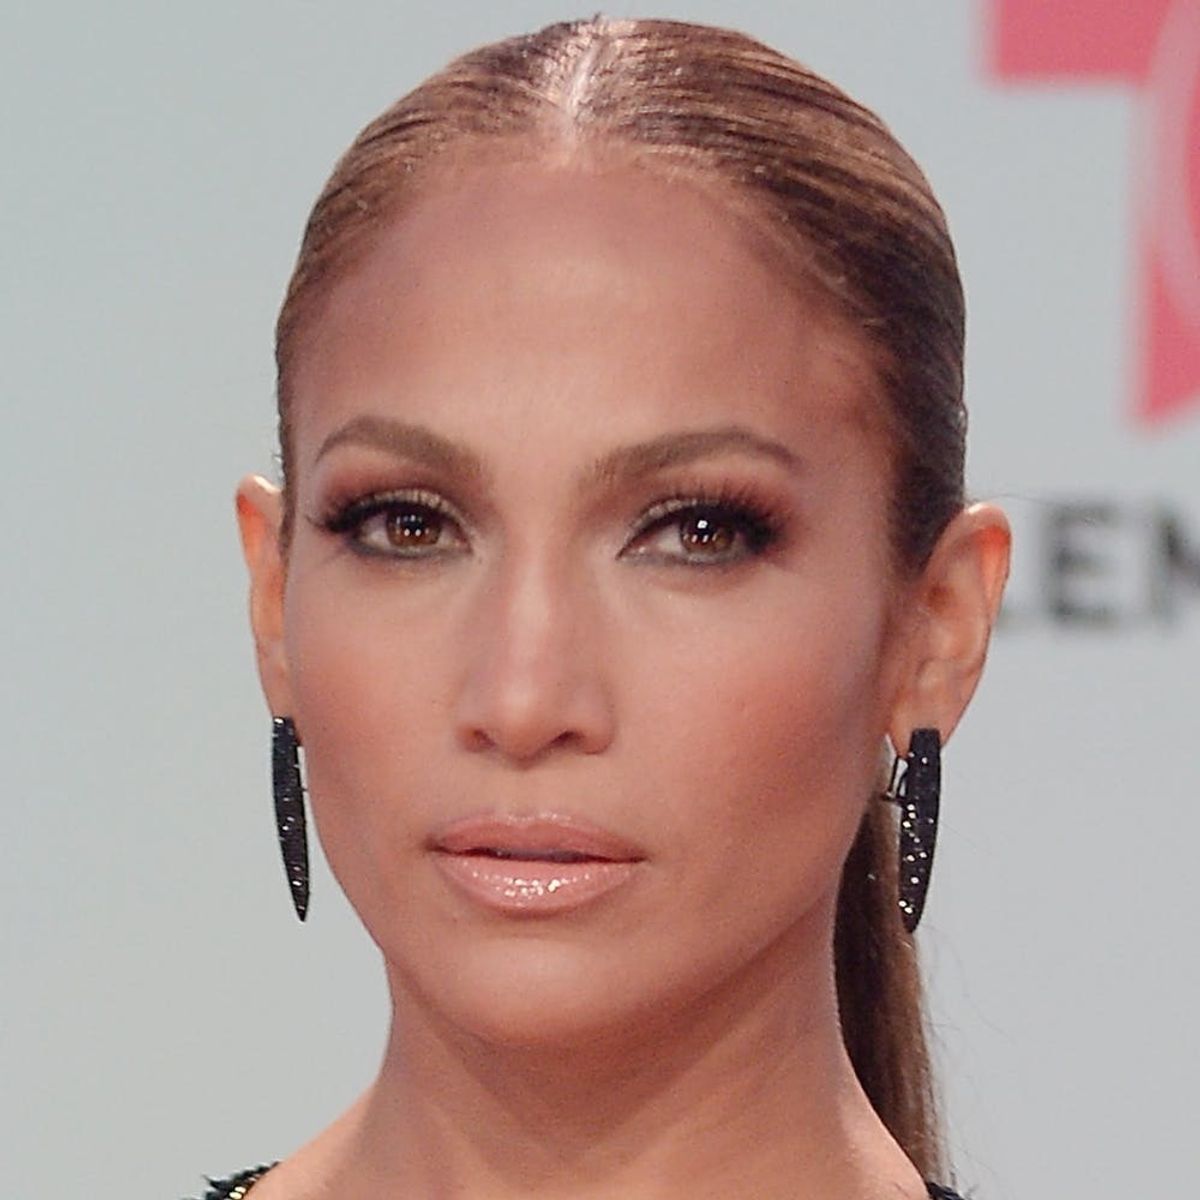 Jennifer Lopez and Others Are Donating Generously to Hurricane Relief in Puerto Rico